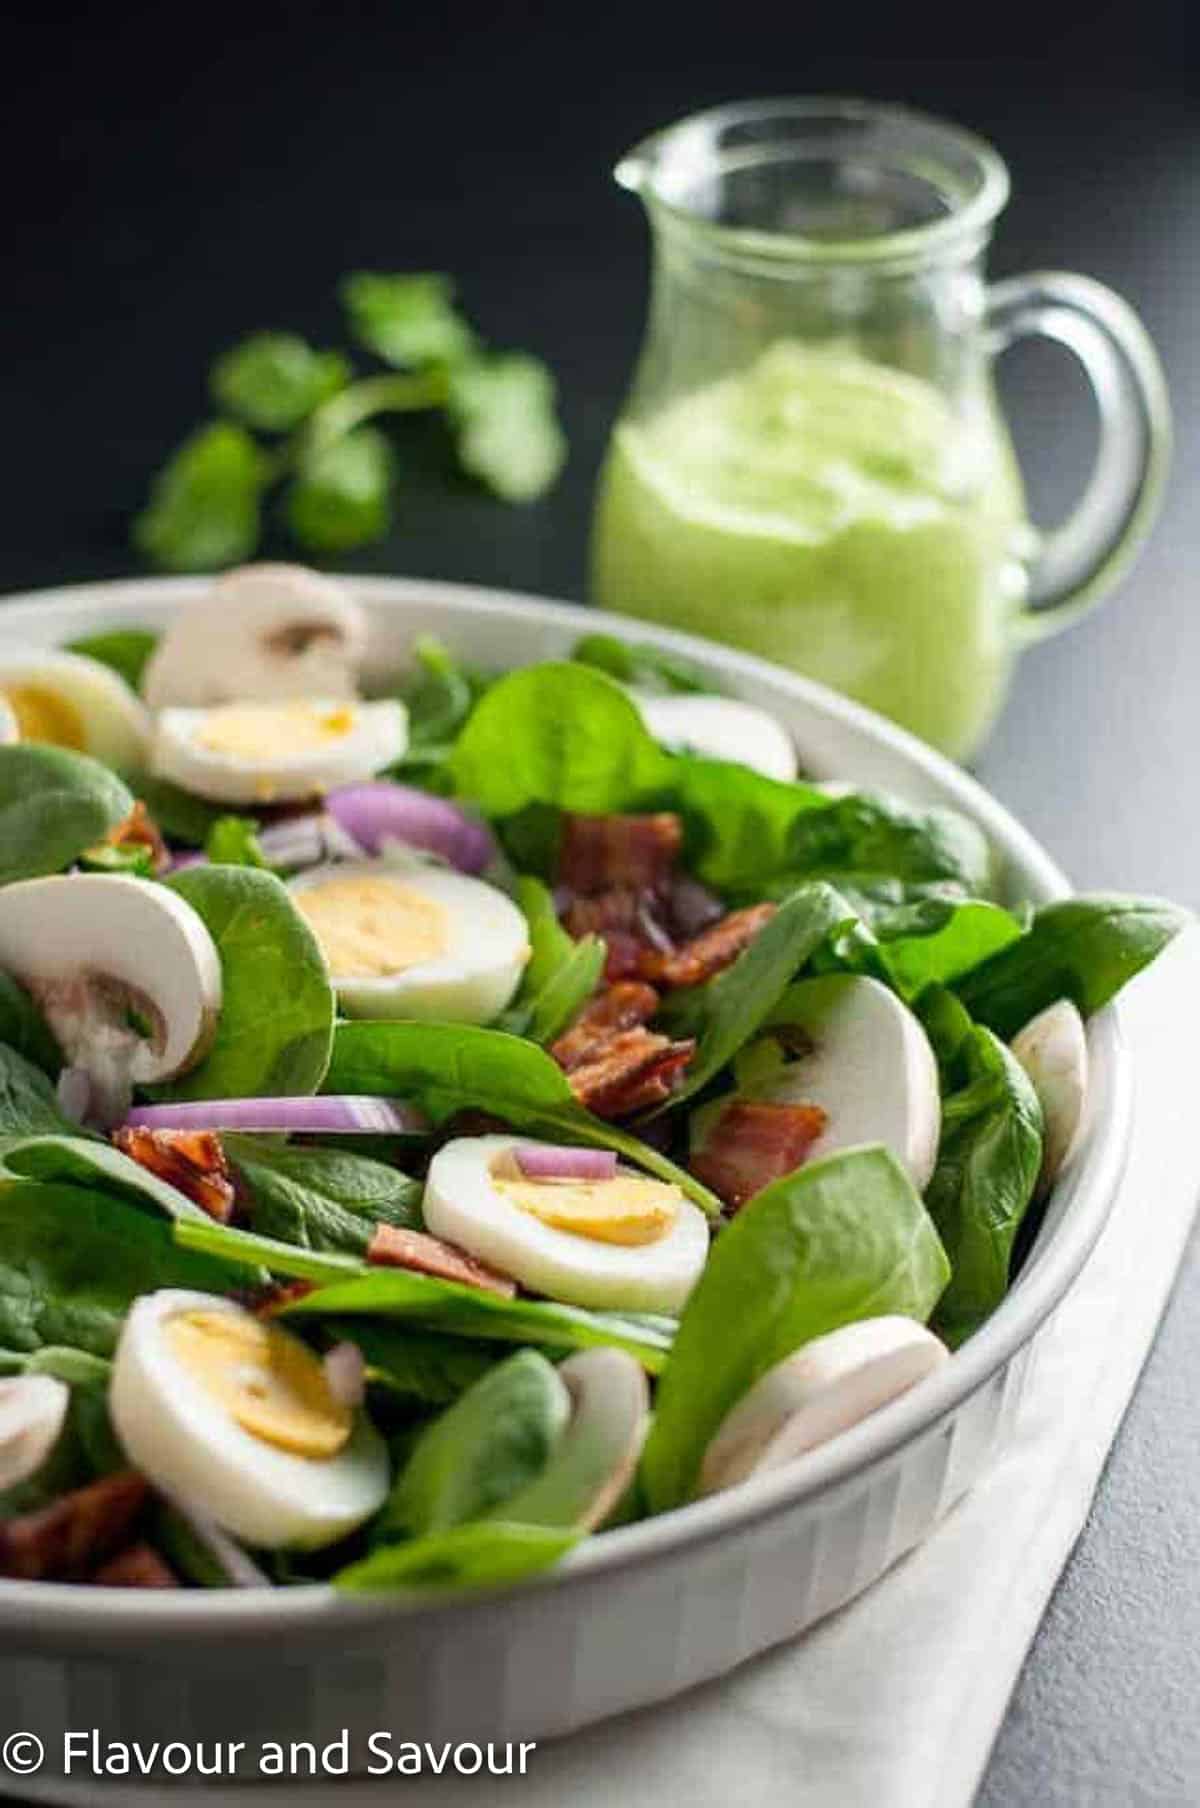 Spinach salad with hard boiled eggs, bacon and mushrooms.